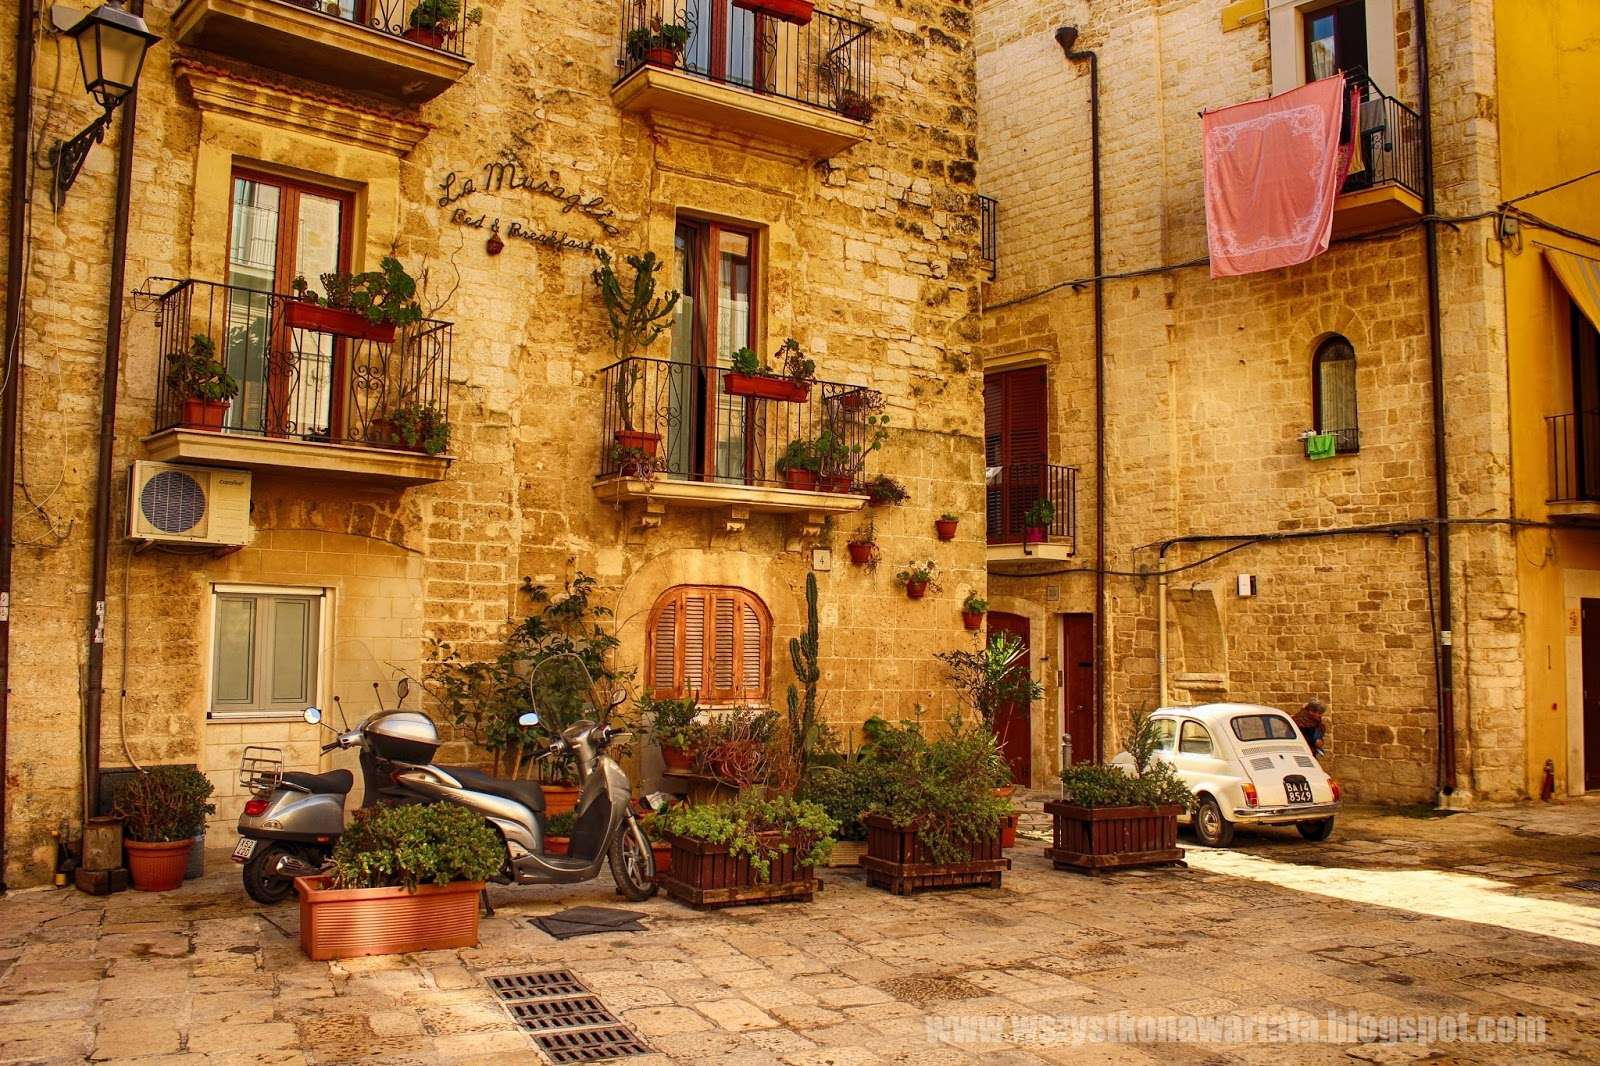 Bari in southern Italy. jigsaw puzzle online